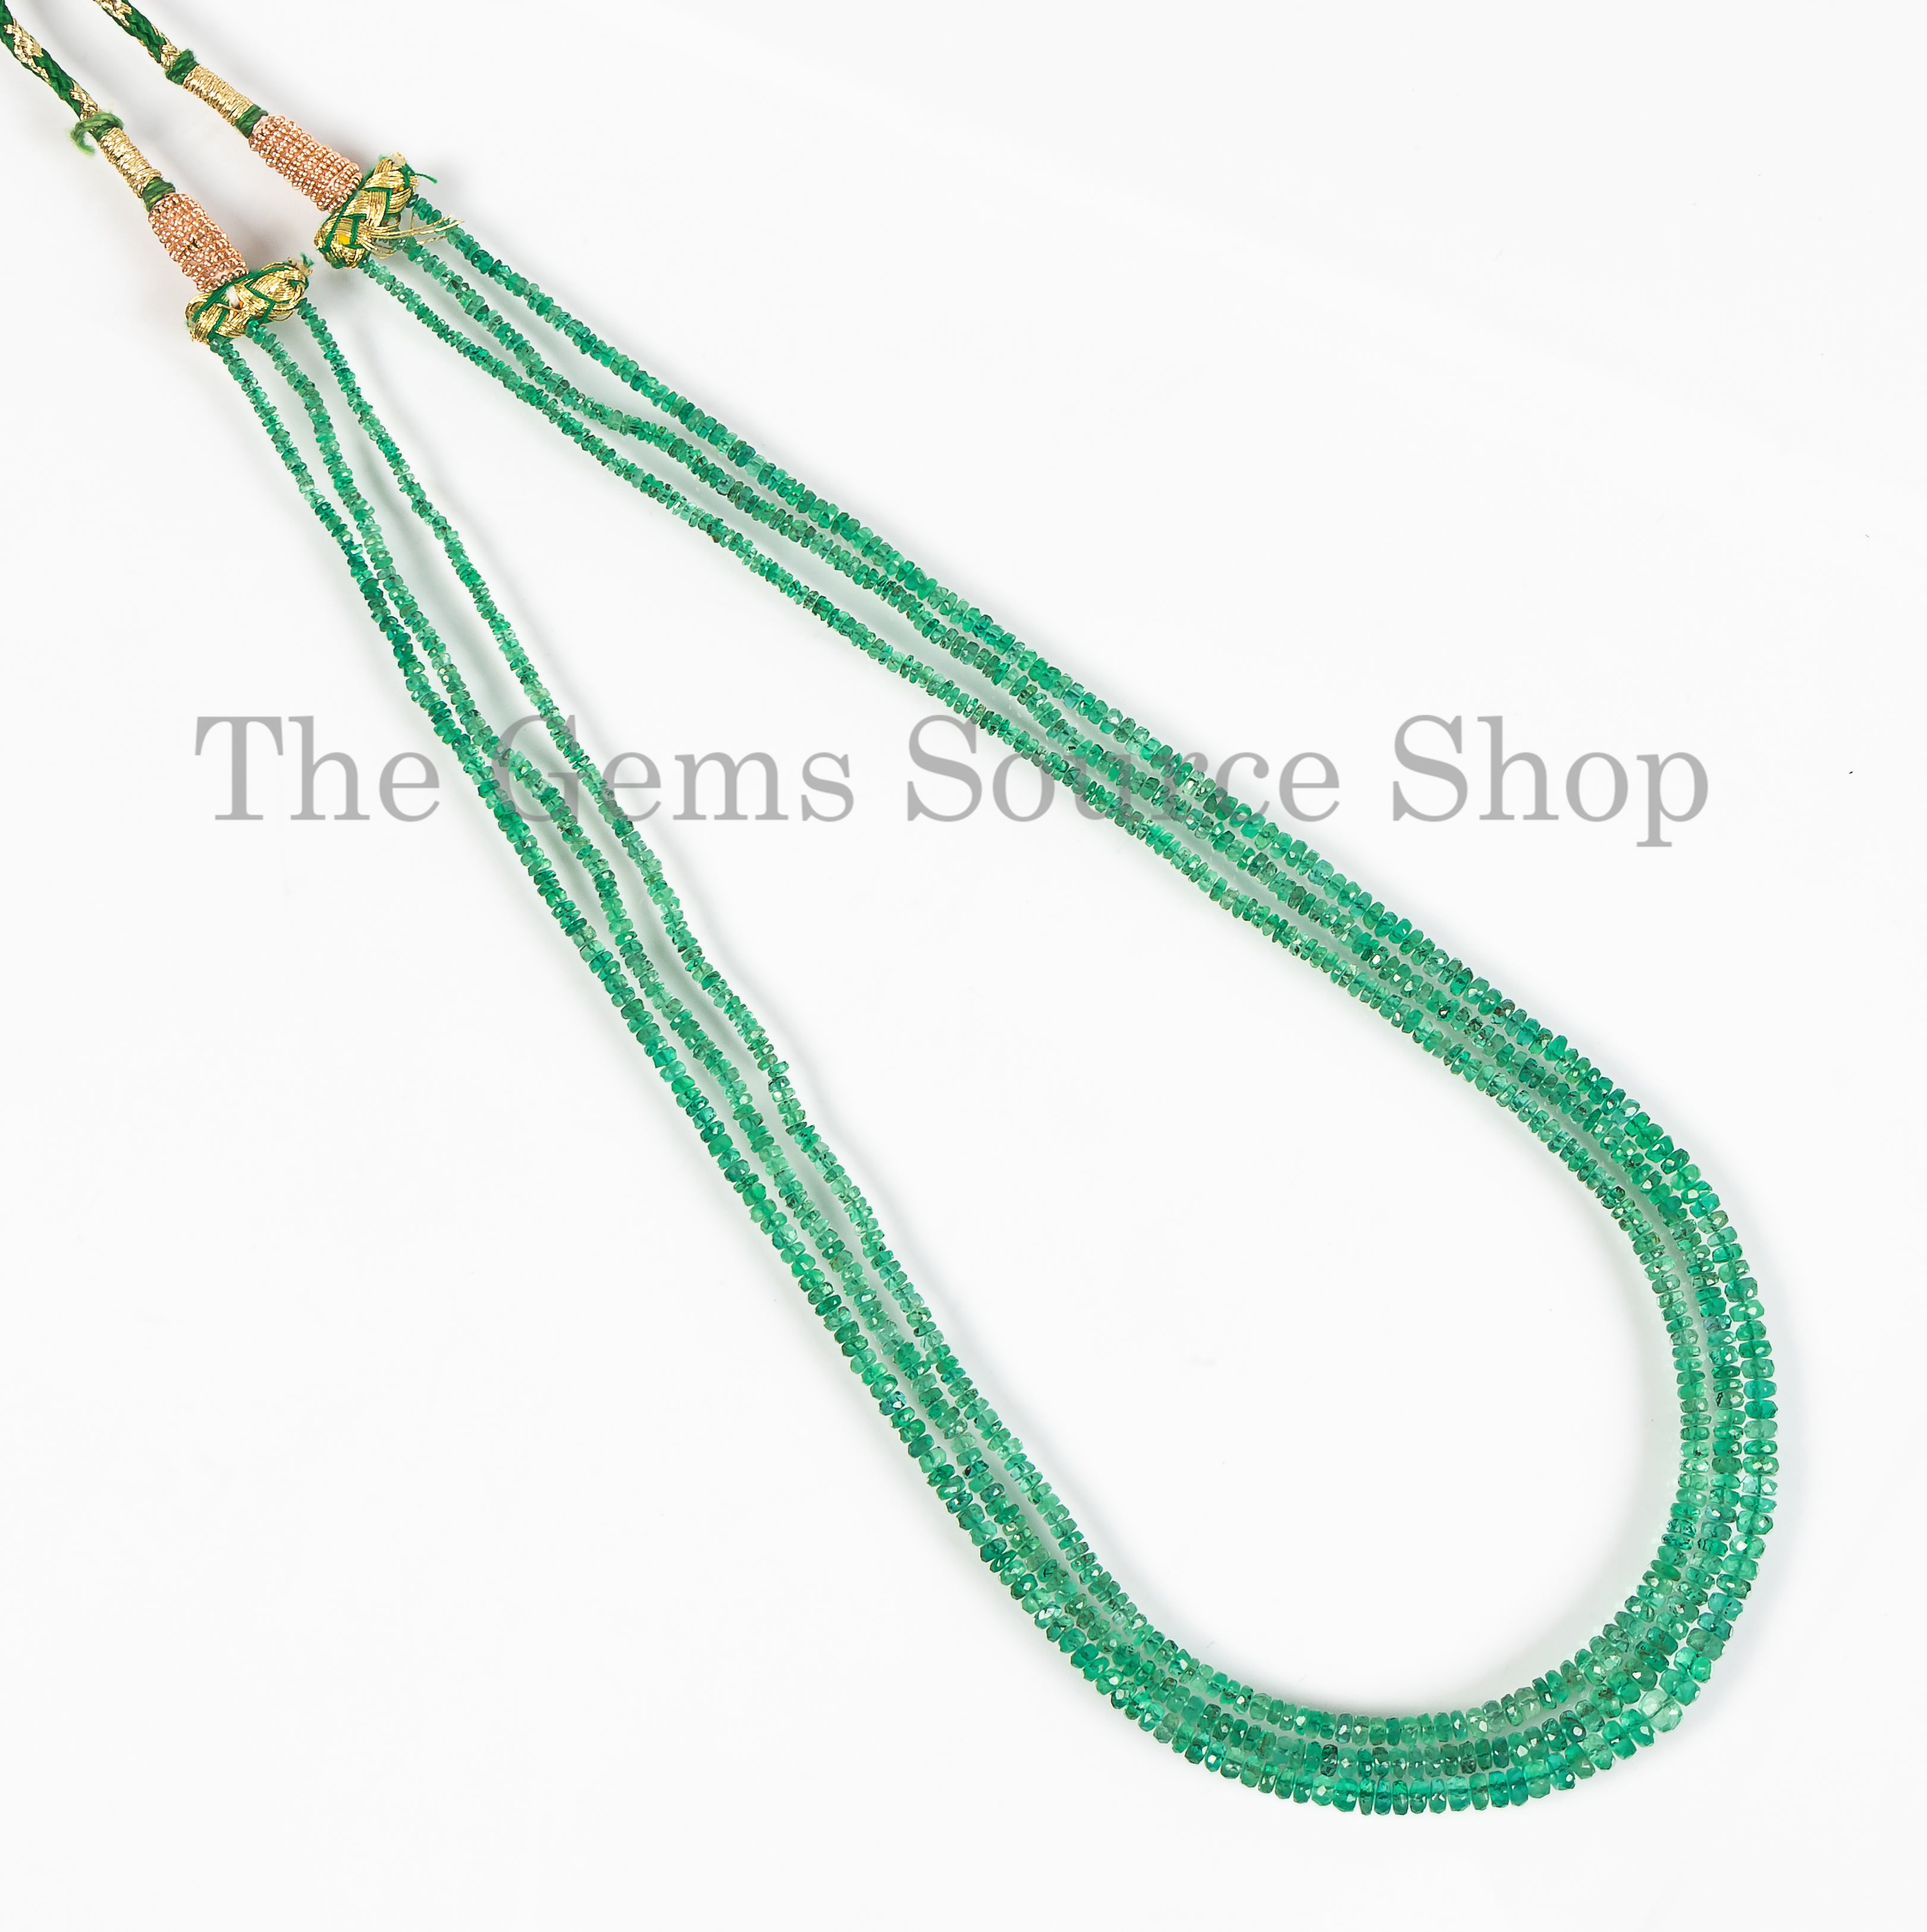 Zambian Emerald Faceted Rondelle Necklace For Women TGS-4616